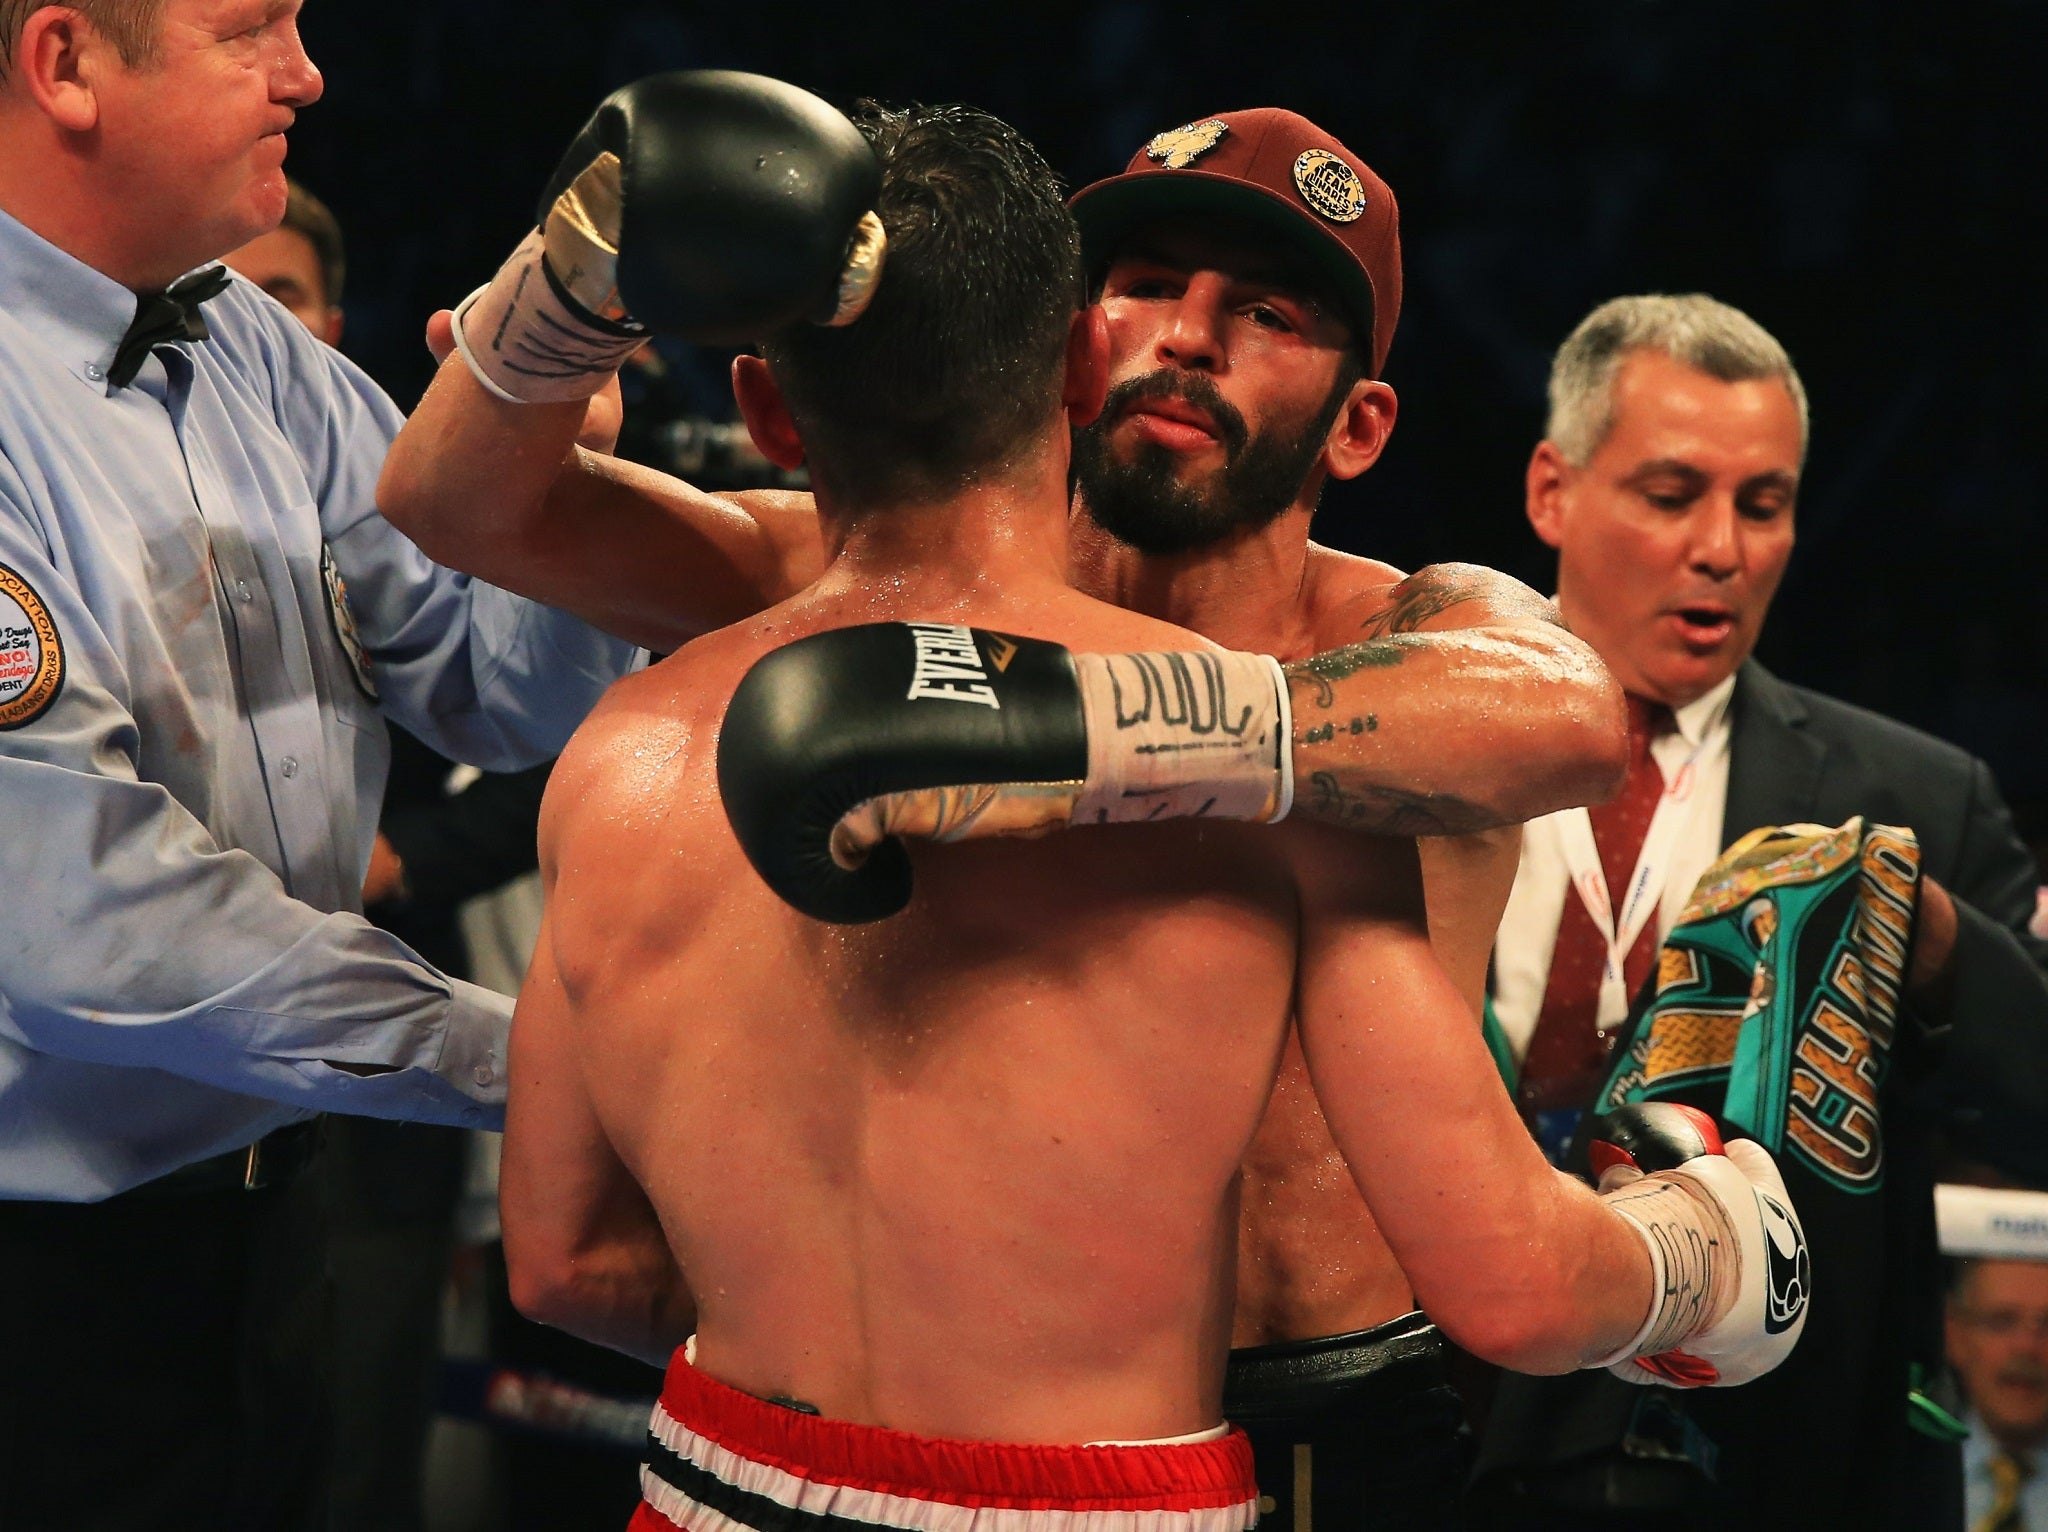 Both Linares and Crolla paid tribute to each other and confirmed plans for a rematch